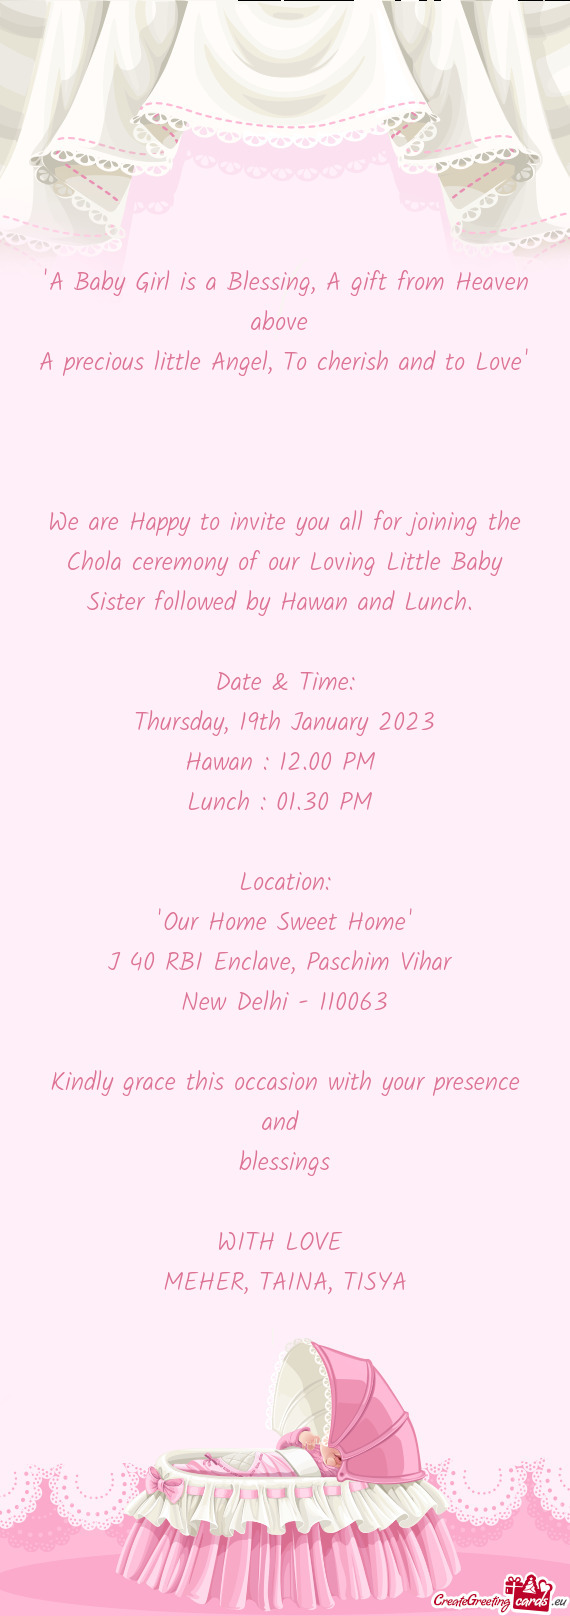 Chola ceremony of our Loving Little Baby Sister followed by Hawan and Lunch